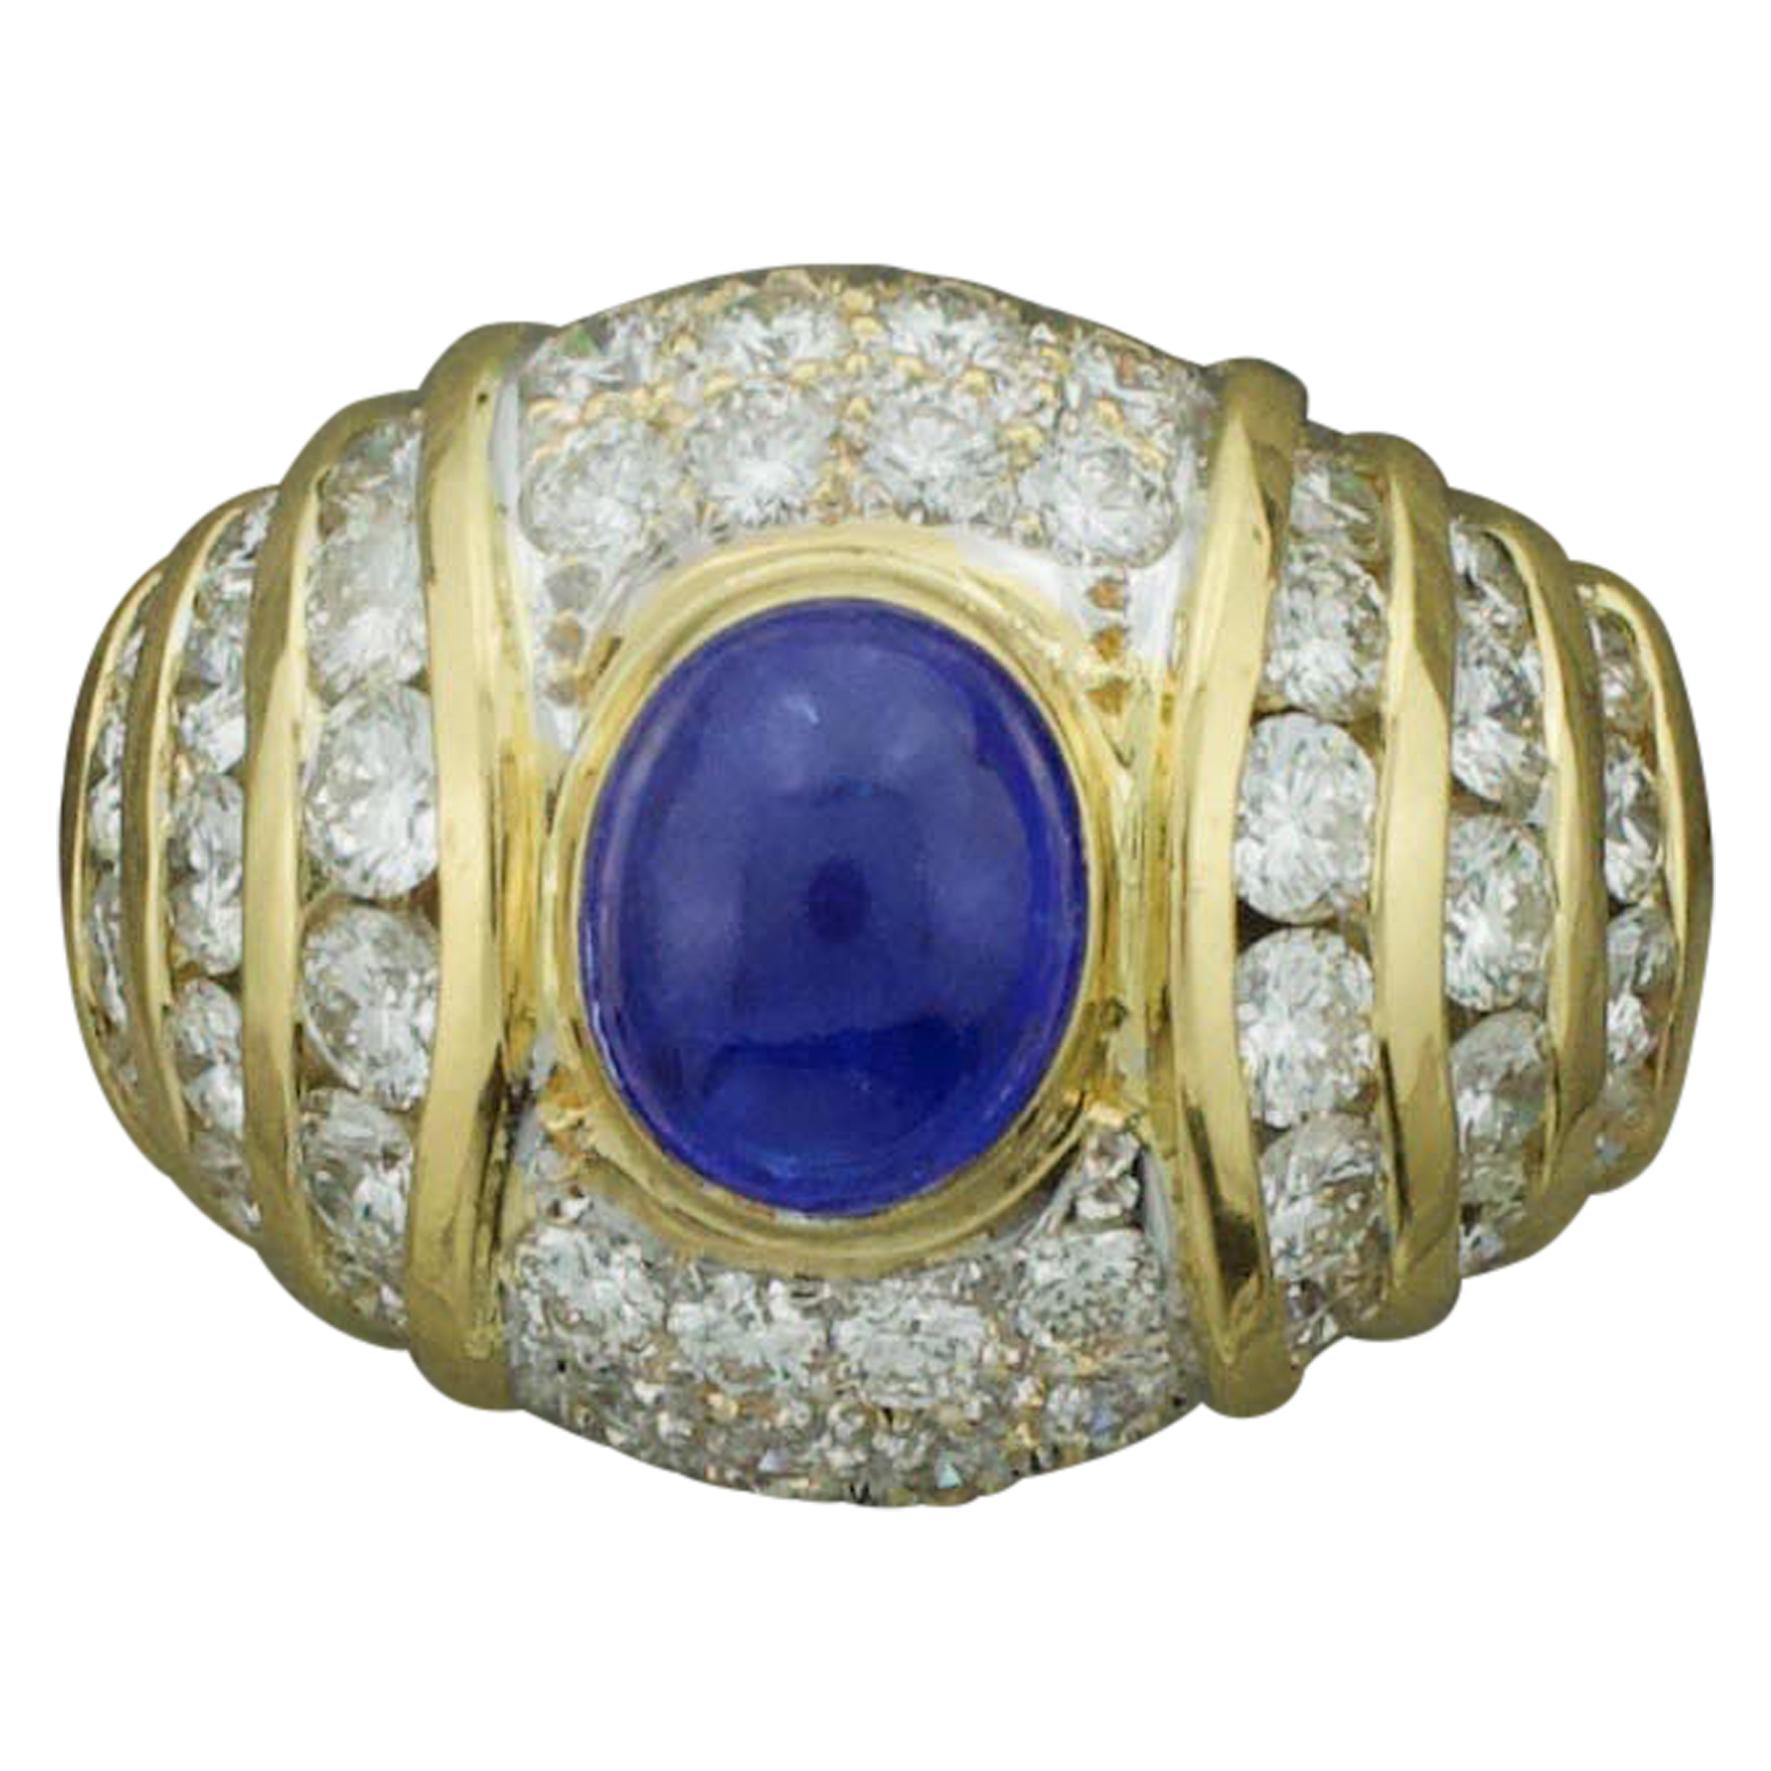 Cabochon Sapphire and Diamond Fashion Ring in 18 Karat Yellow Gold circa 1970s For Sale